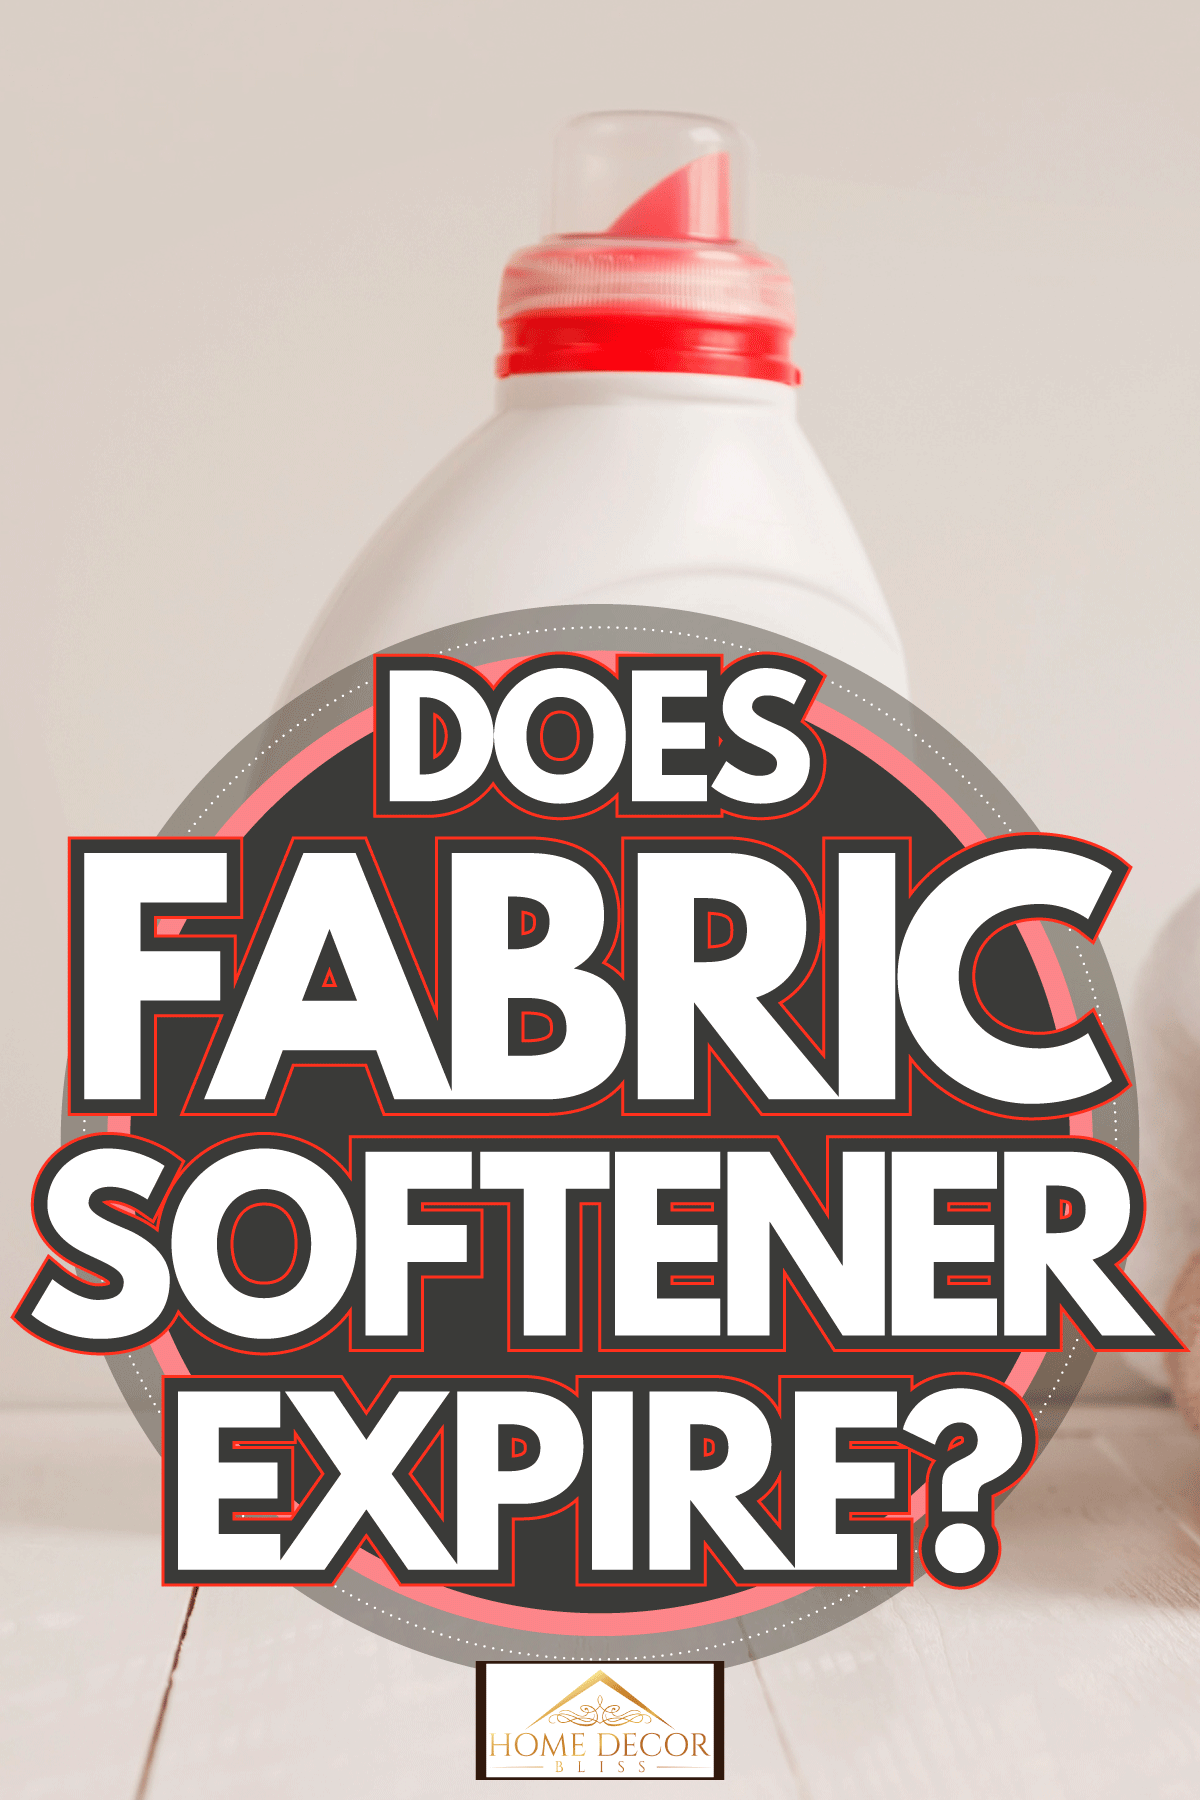 Liquid Softener is perfect for bringing out the good smell of your fabric, Does Fabric Softener Expire?